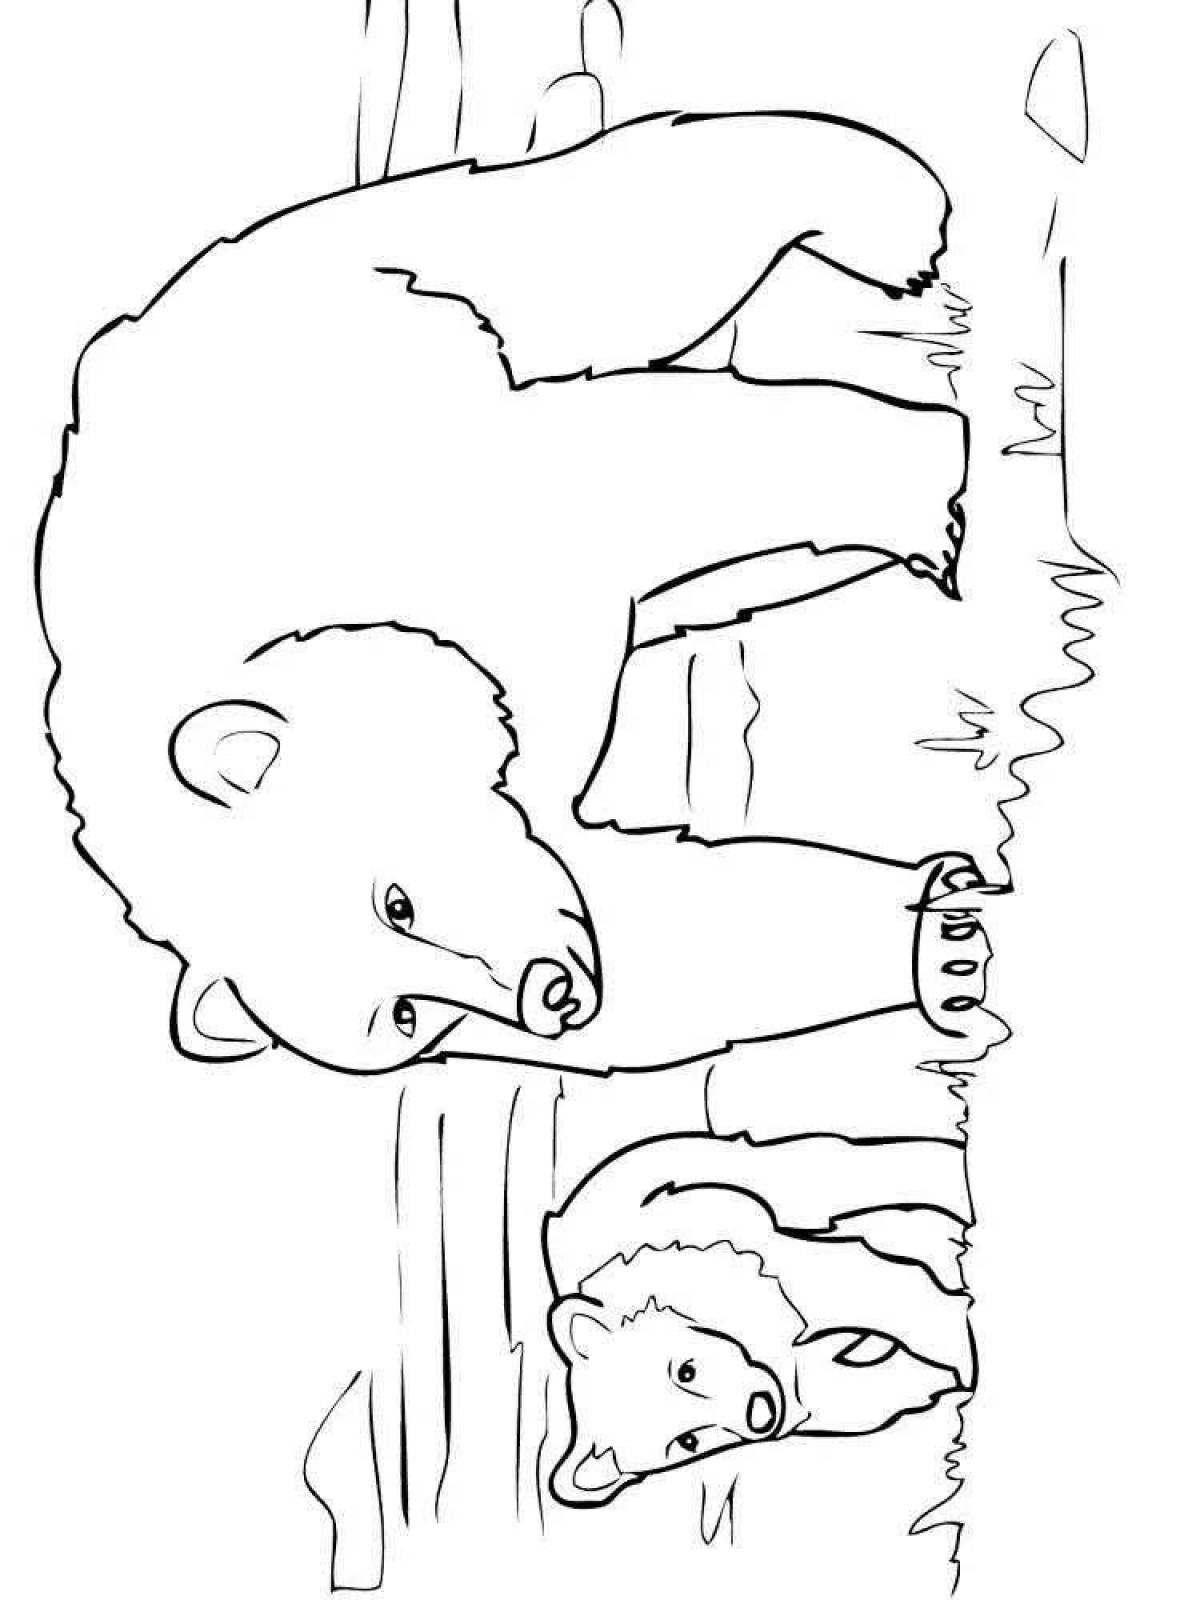 Coloring page friendly bear in the forest